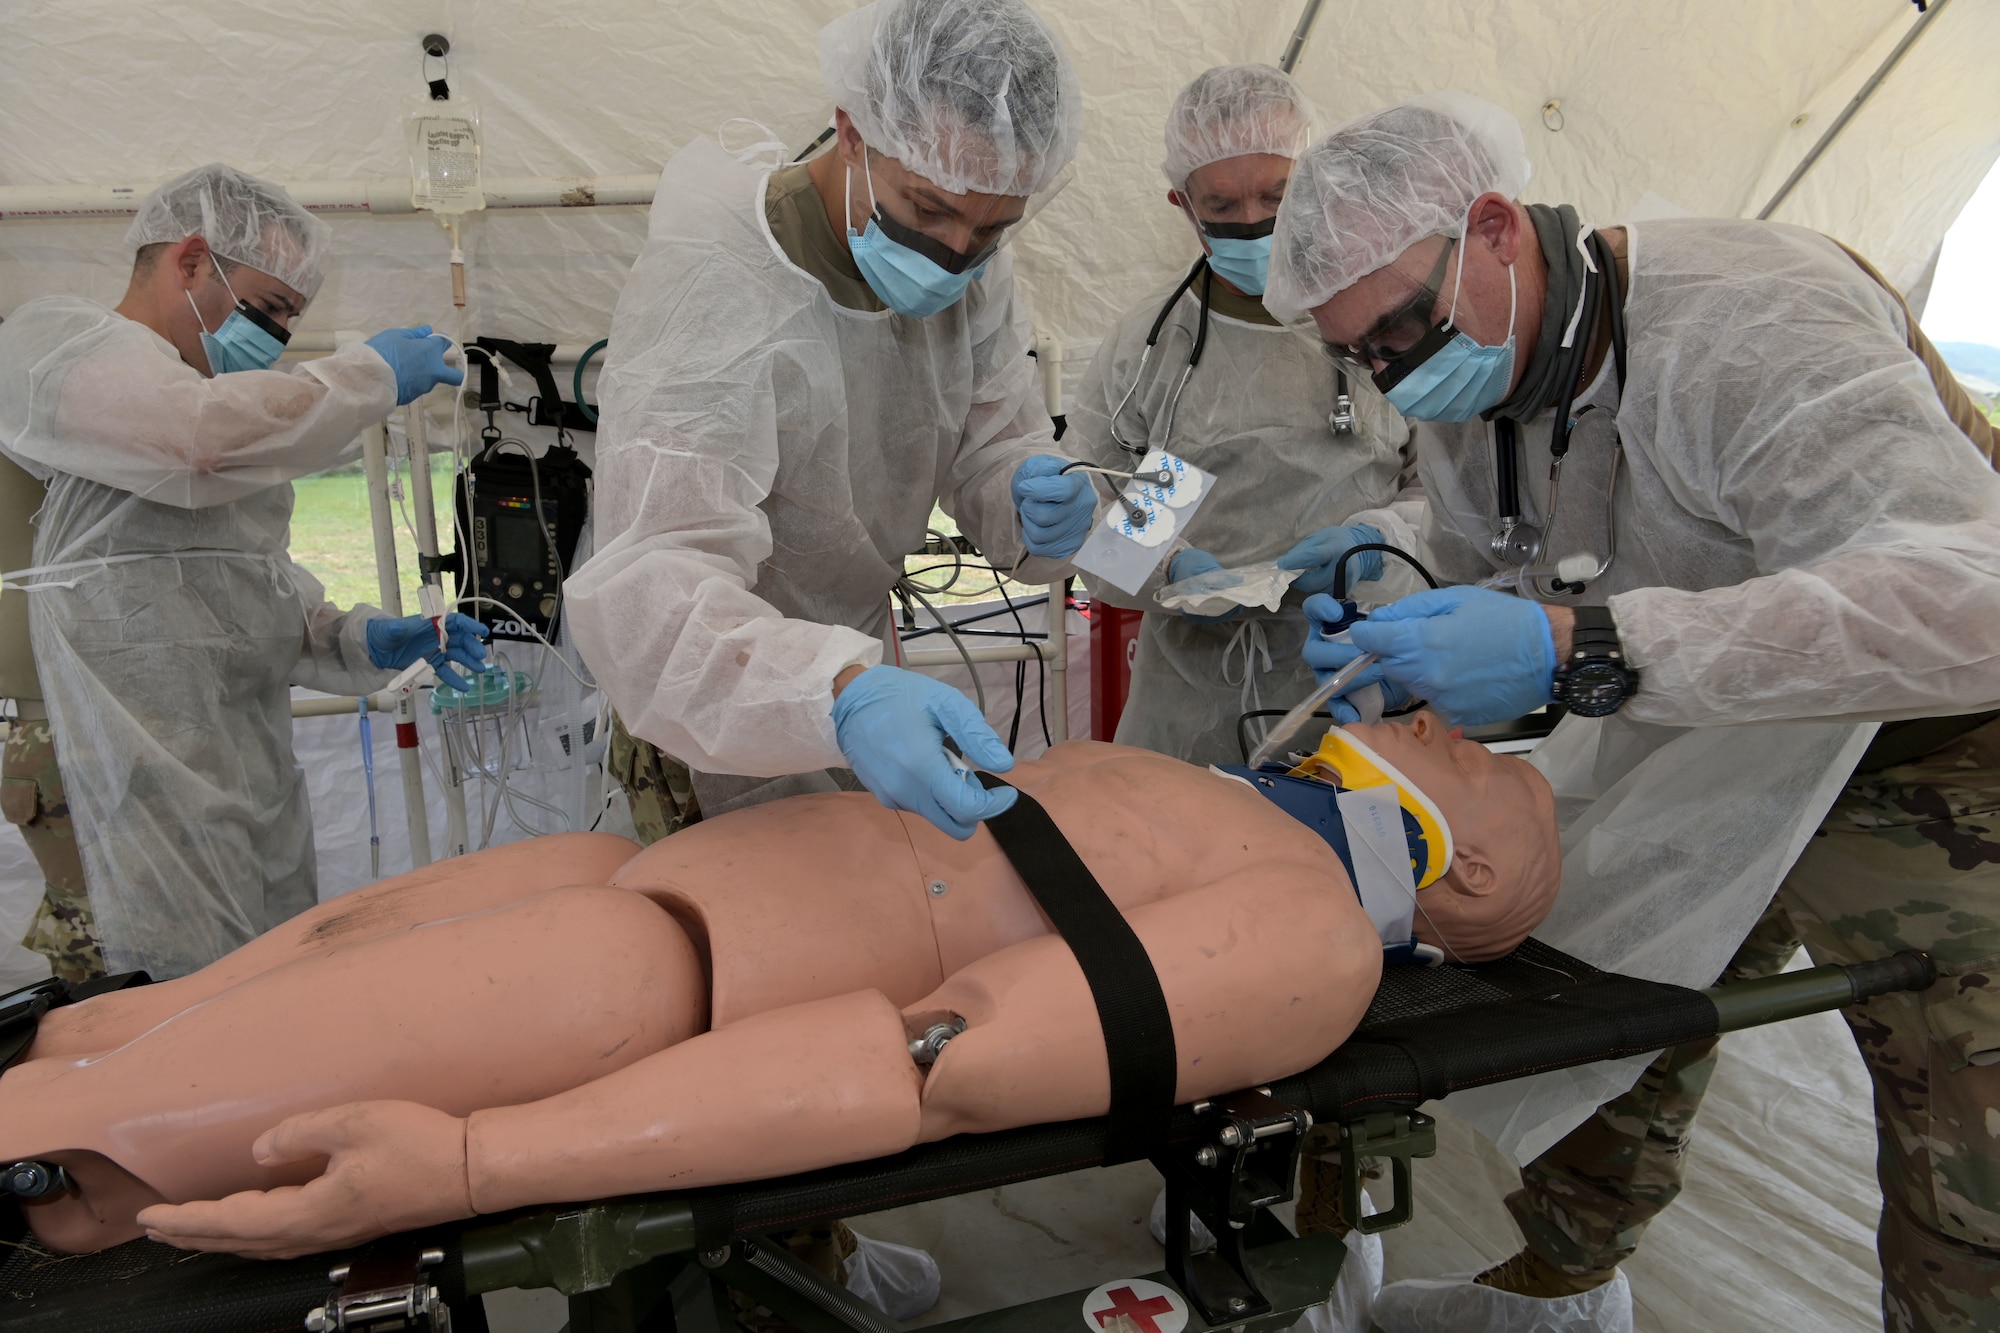 U.S. Air Force medics with the 156th Medical Group Detachment 1, Chemical, Biological, Radiological, Nuclear and high-yield Explosive Enhanced Response Force Package, evaluate and treat a simulated victim during a search and extraction training exercise at Camp Santiago Joint Training Center, Salinas, Puerto Rico, Aug. 19, 2021.